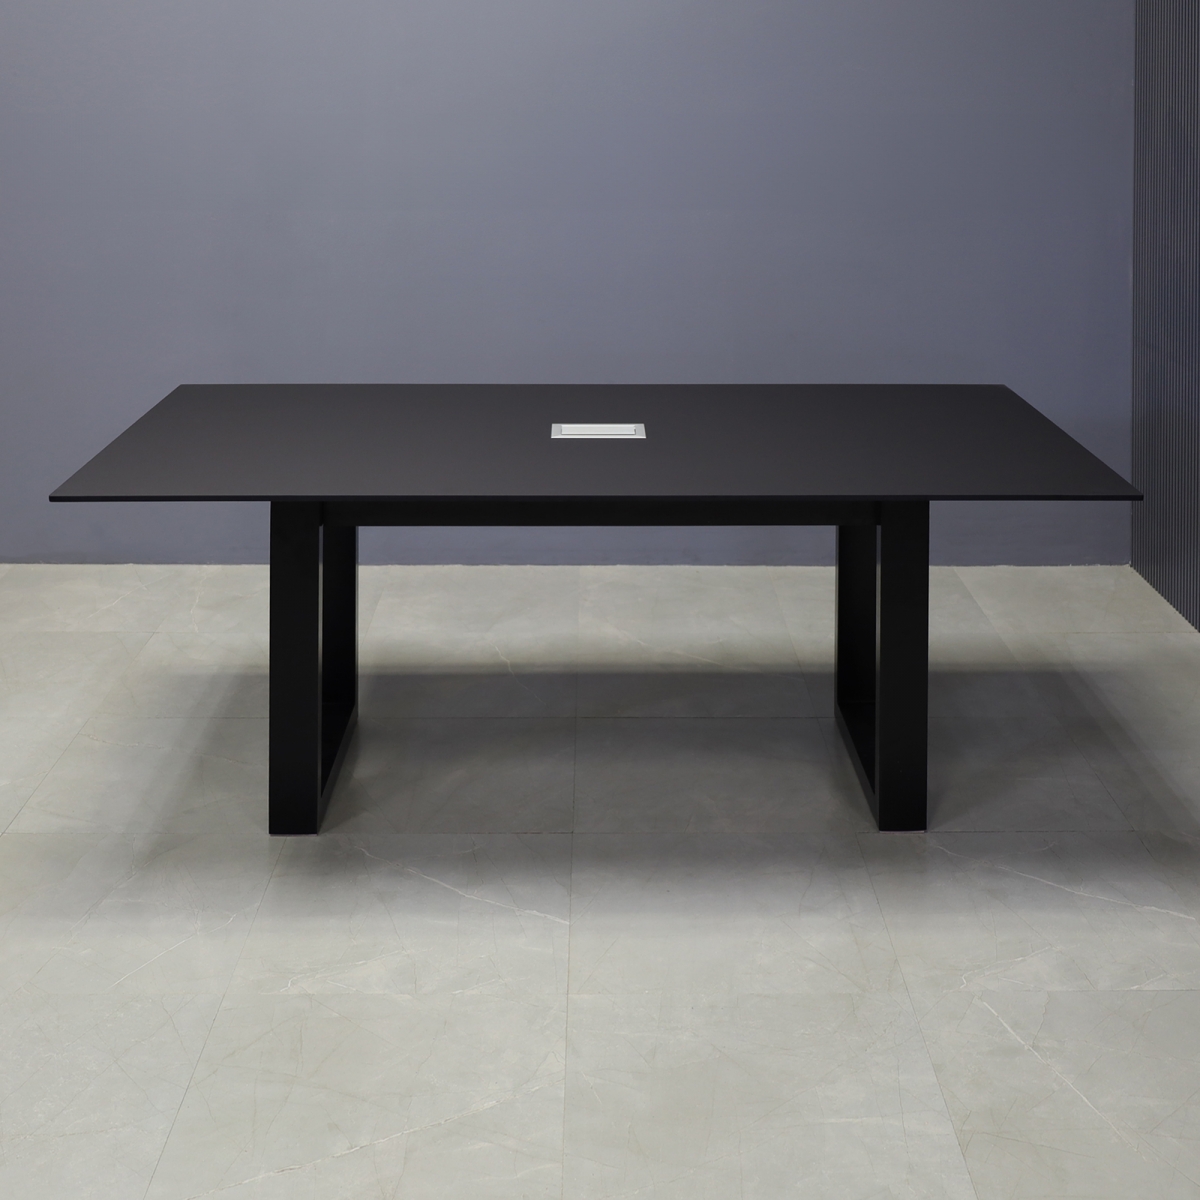 Aurora Rectangular Shape Conference Table in Black OPAK Engineered Stone - 84 In. - Stock #51